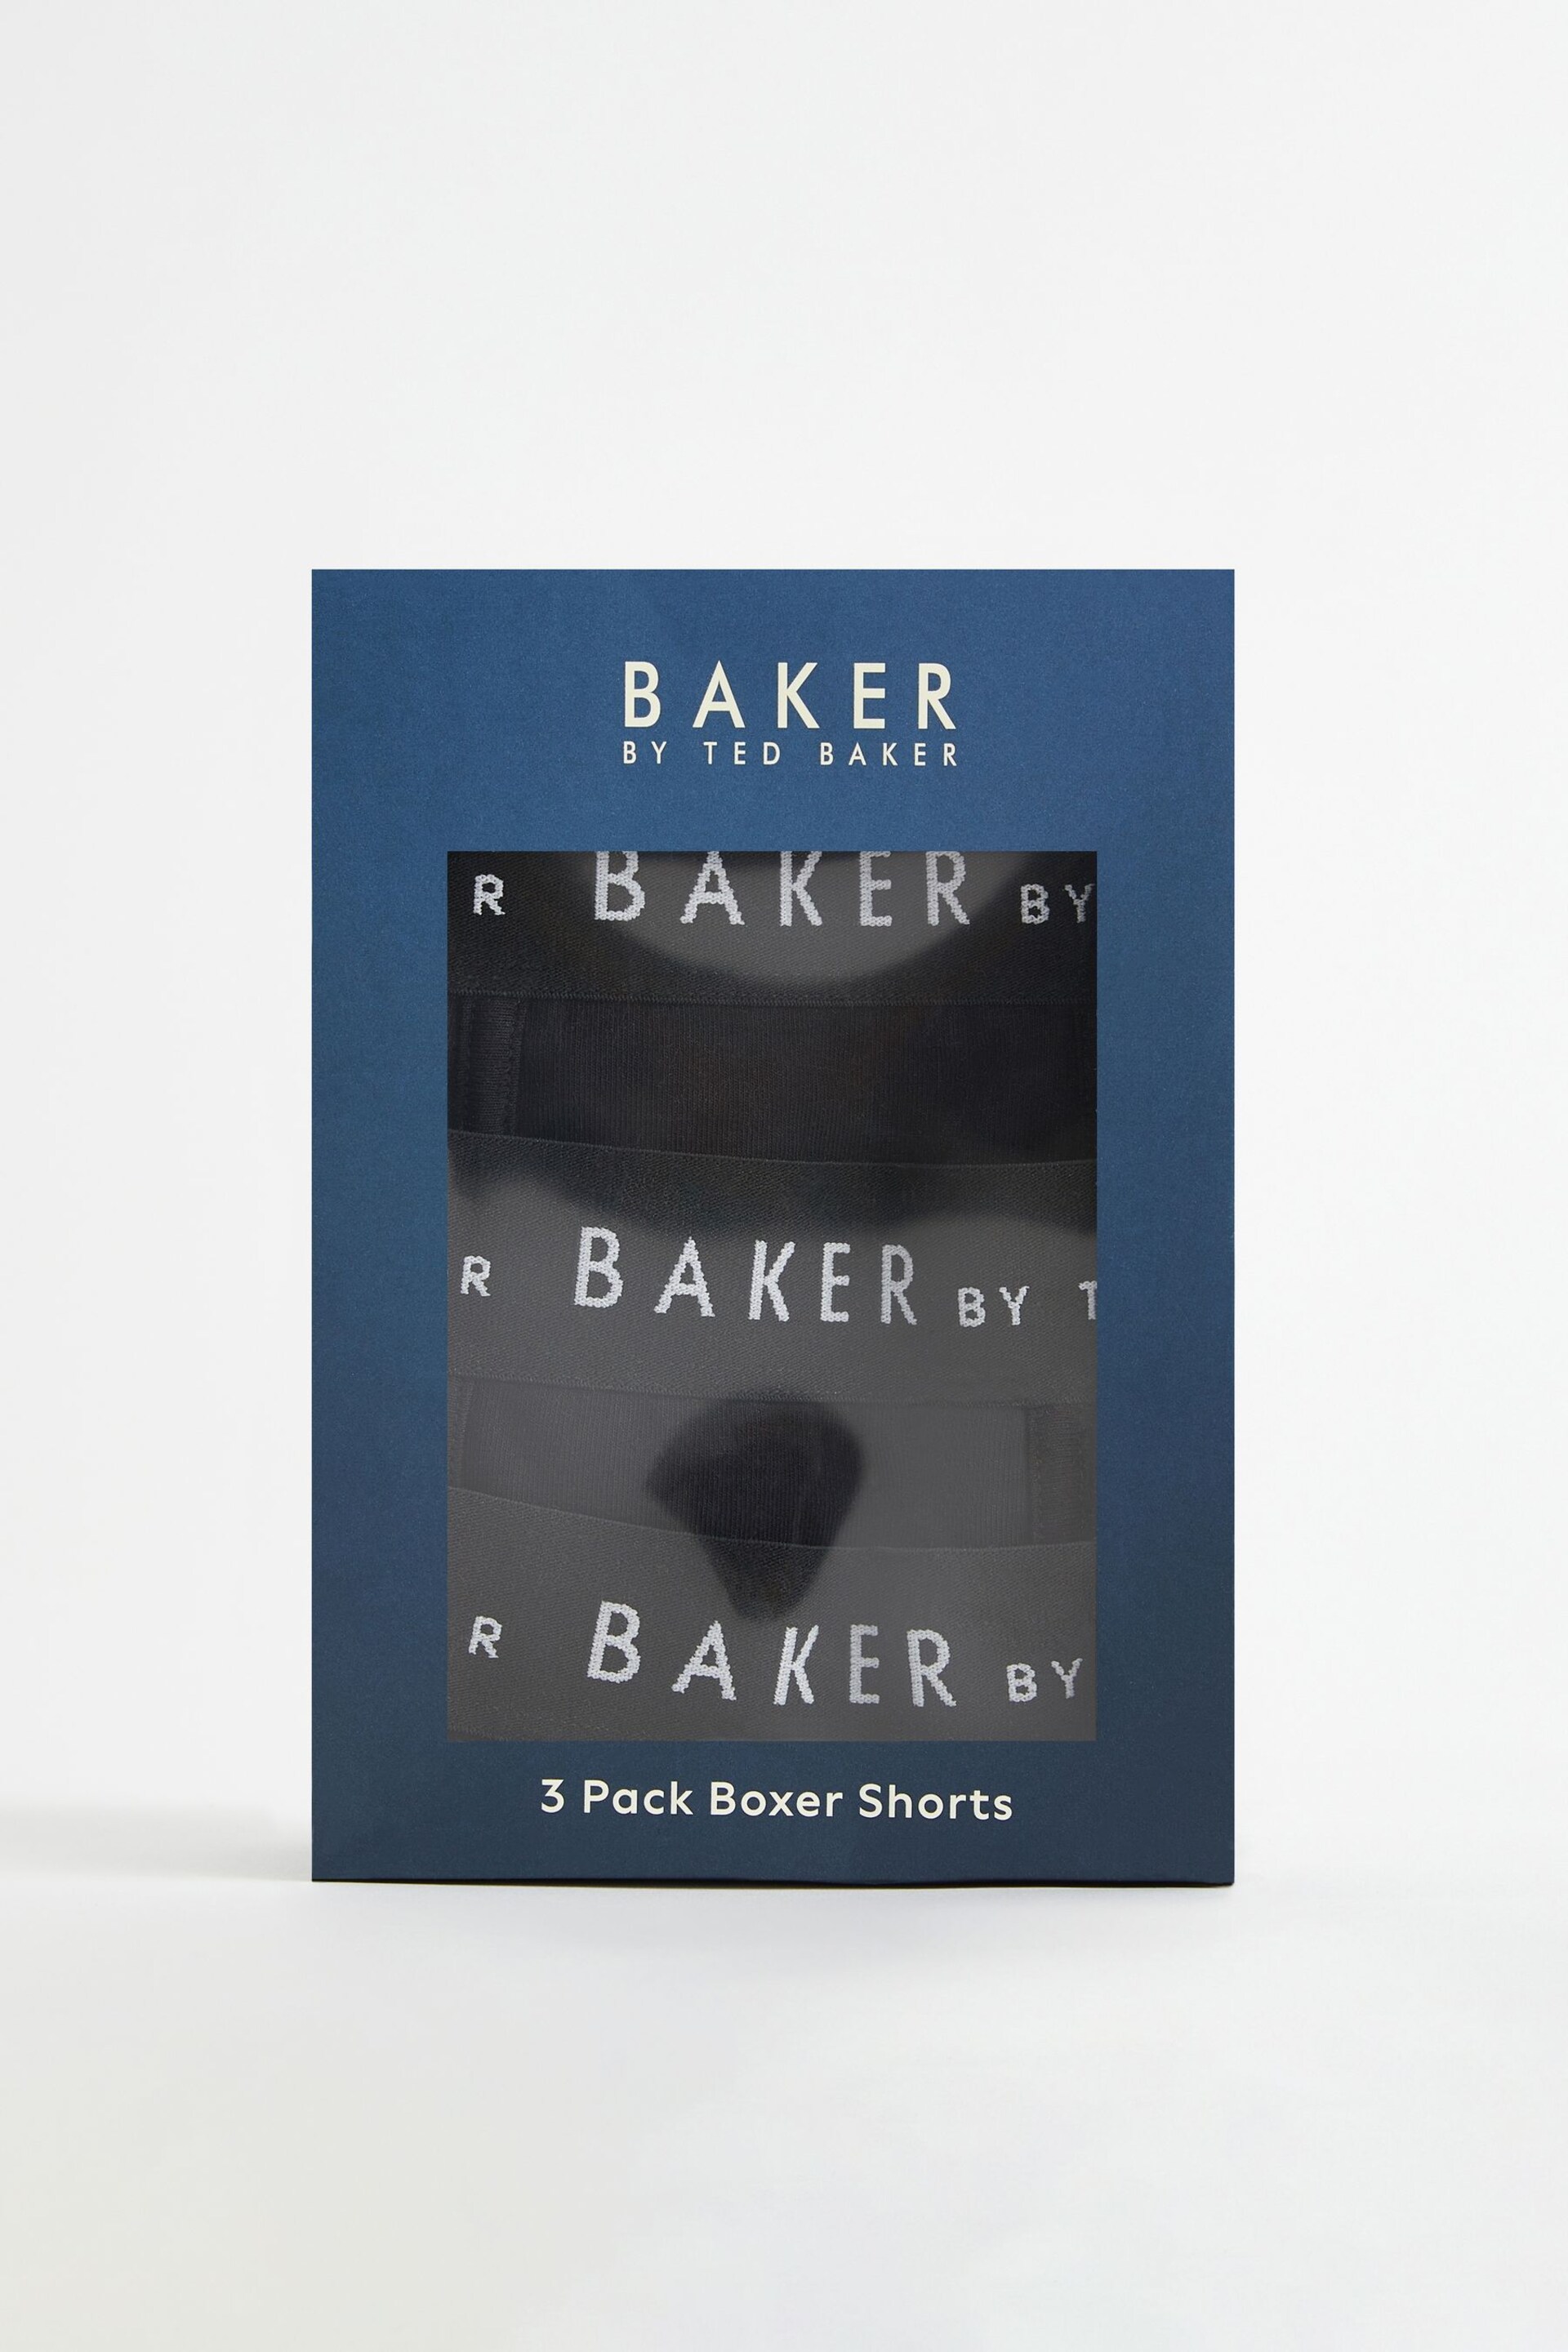 Baker by Ted Baker Boxers 3 Pack - Image 5 of 5